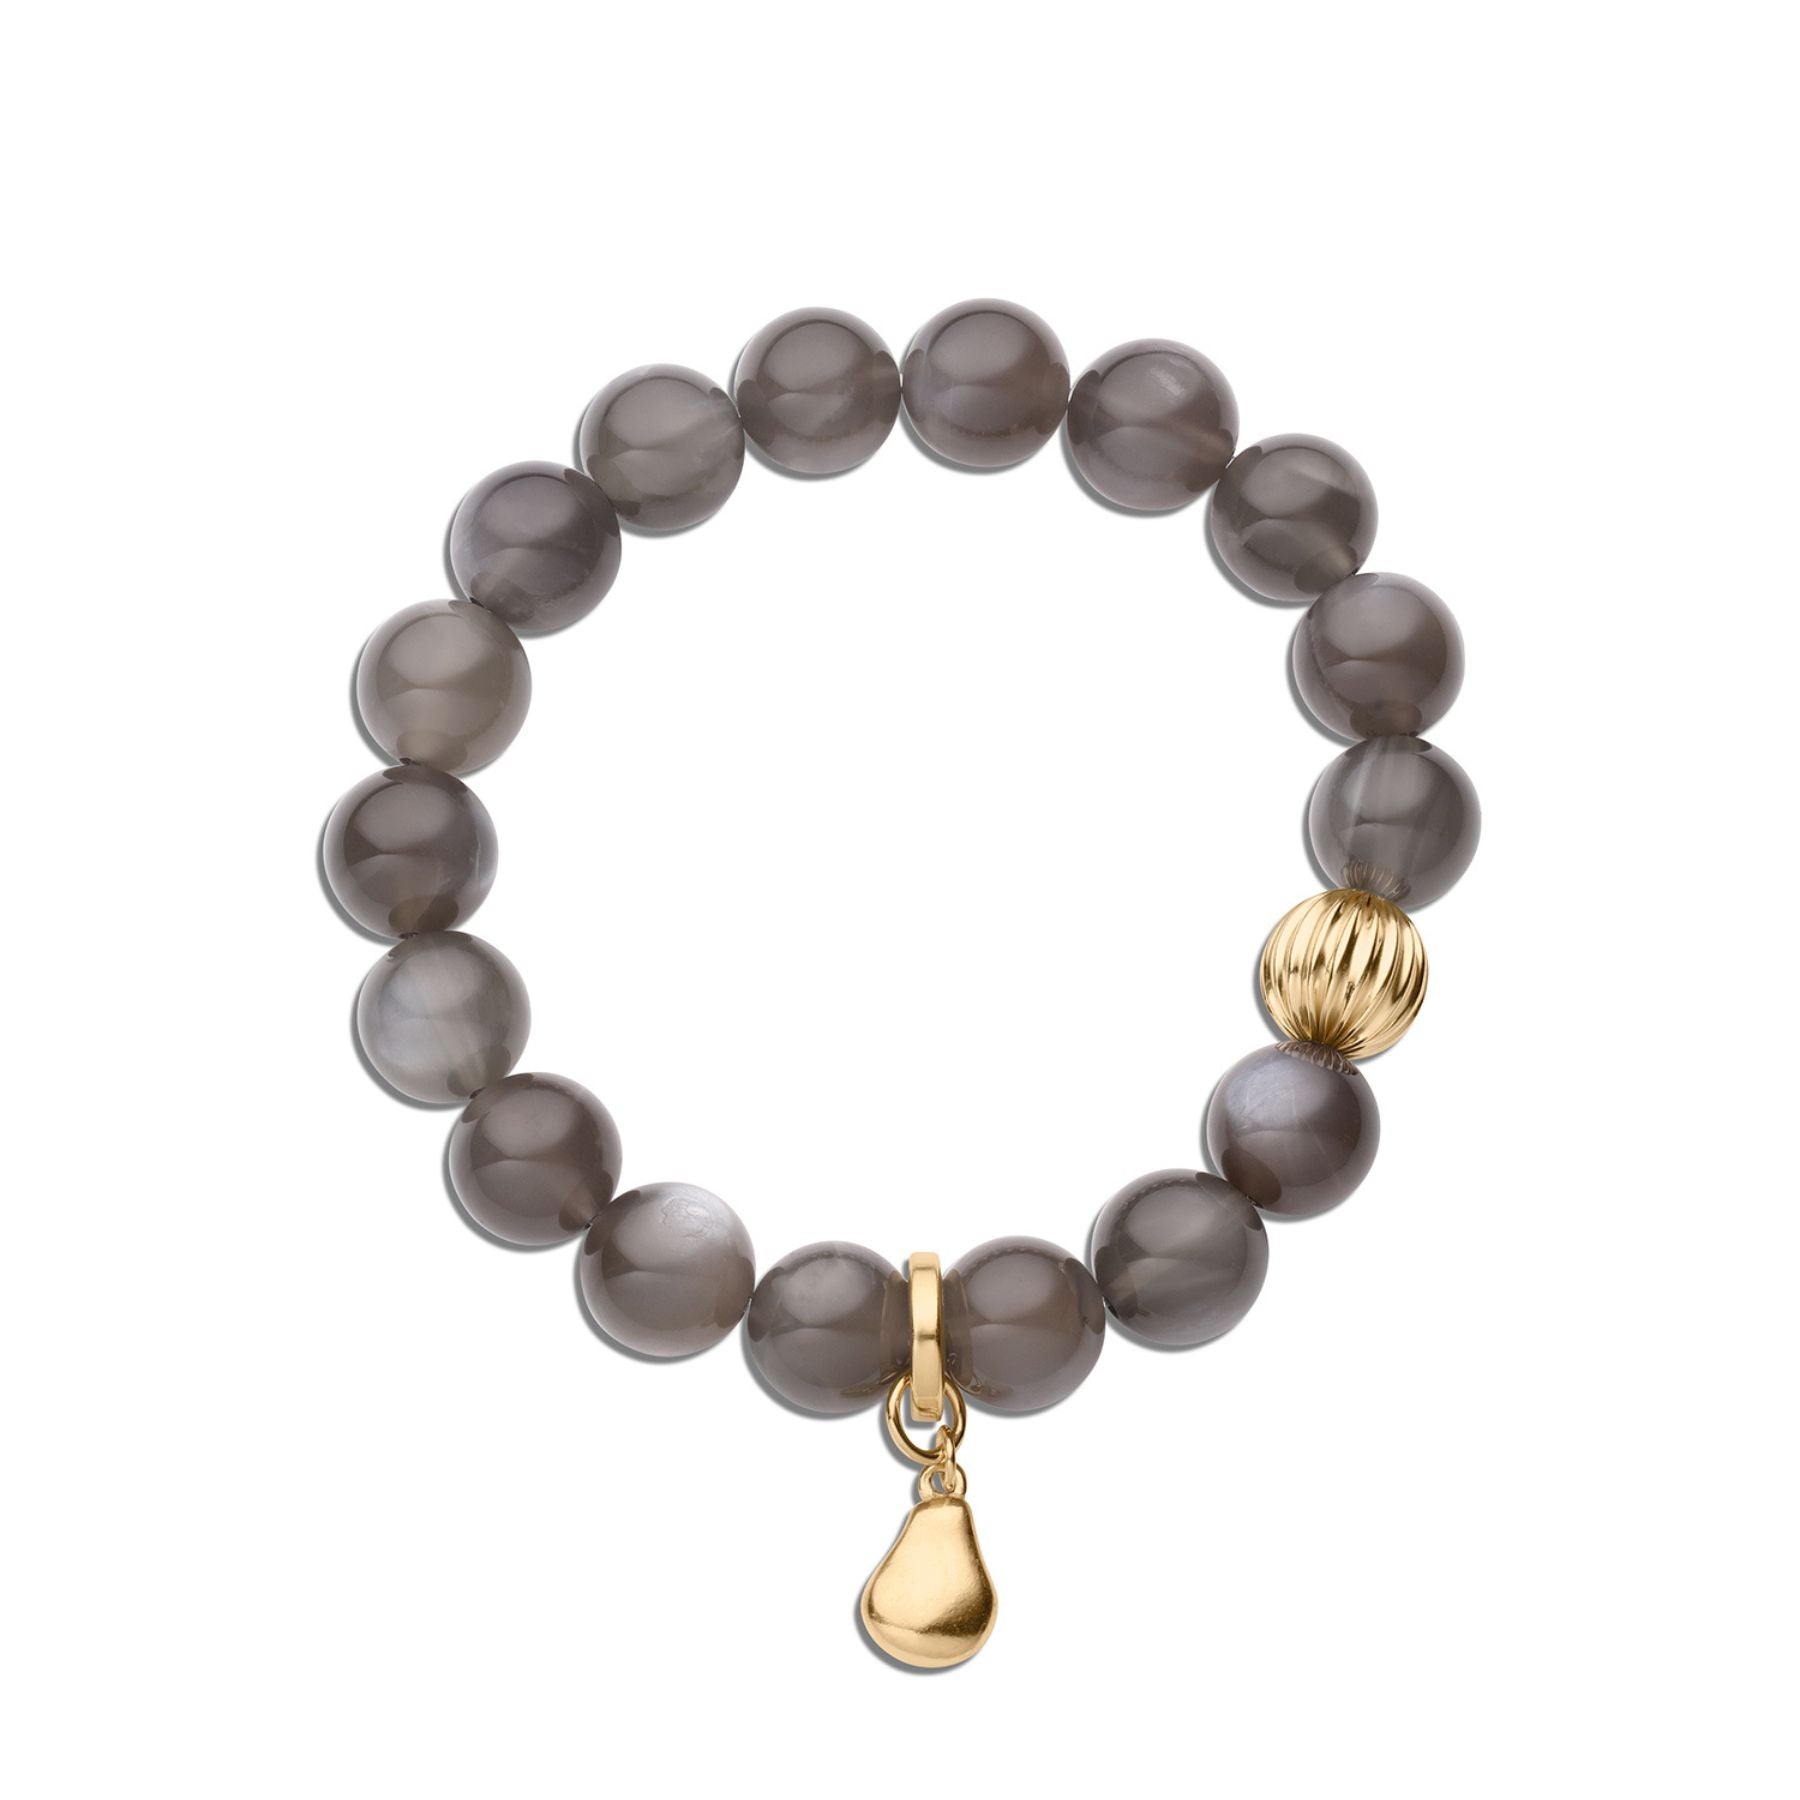 Black moonstone crystal bracelet with gold corrugated bead and gold pear charm